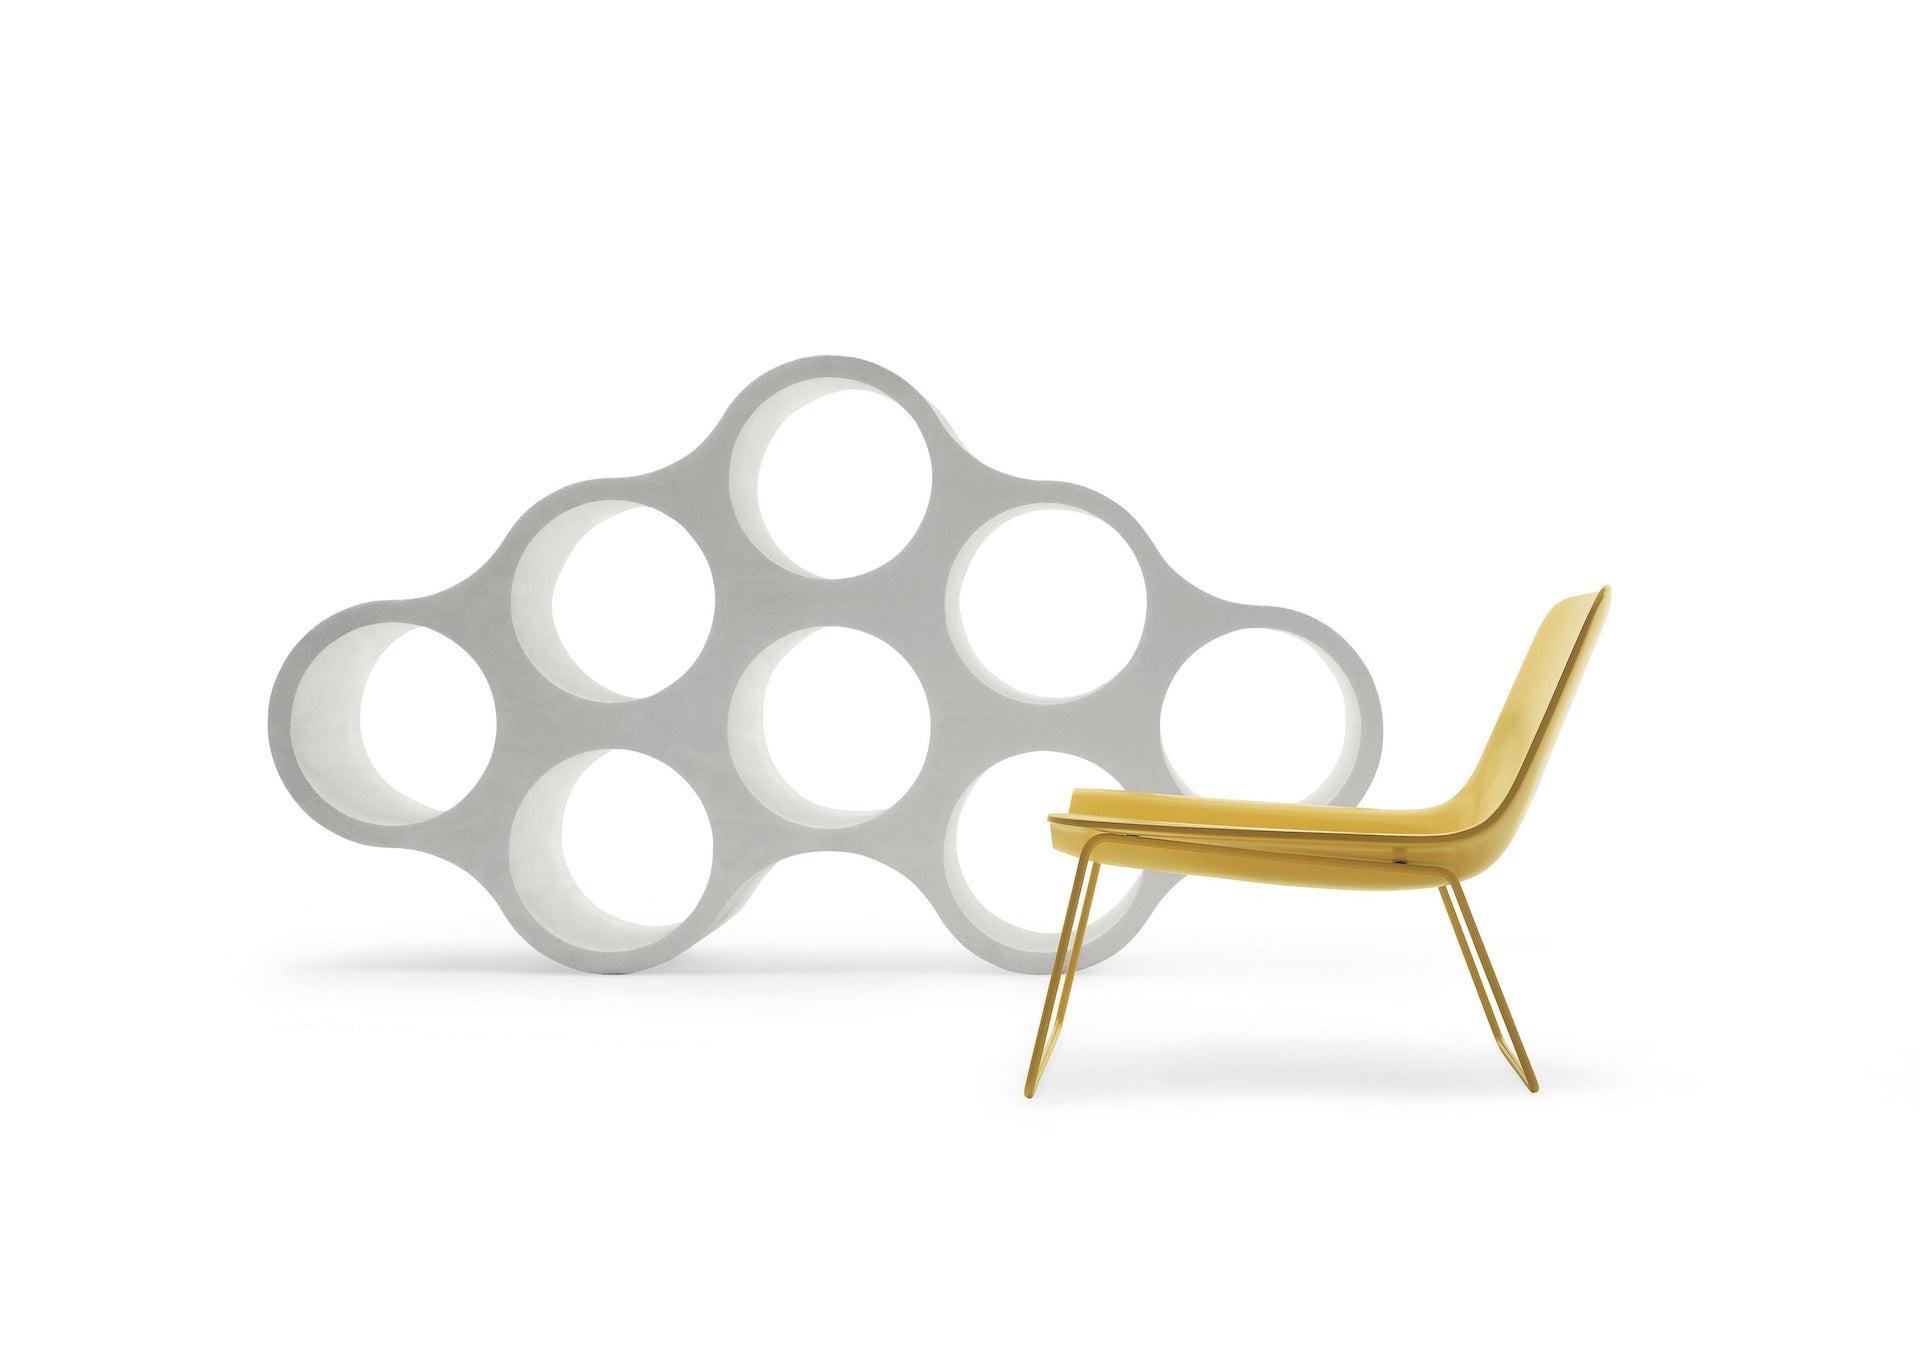 Cloud Bookcase, 2002, and Spring Chair, 2000, by Ronan and Erwan Bouroullec for Cappelini. Photo © Cappellini